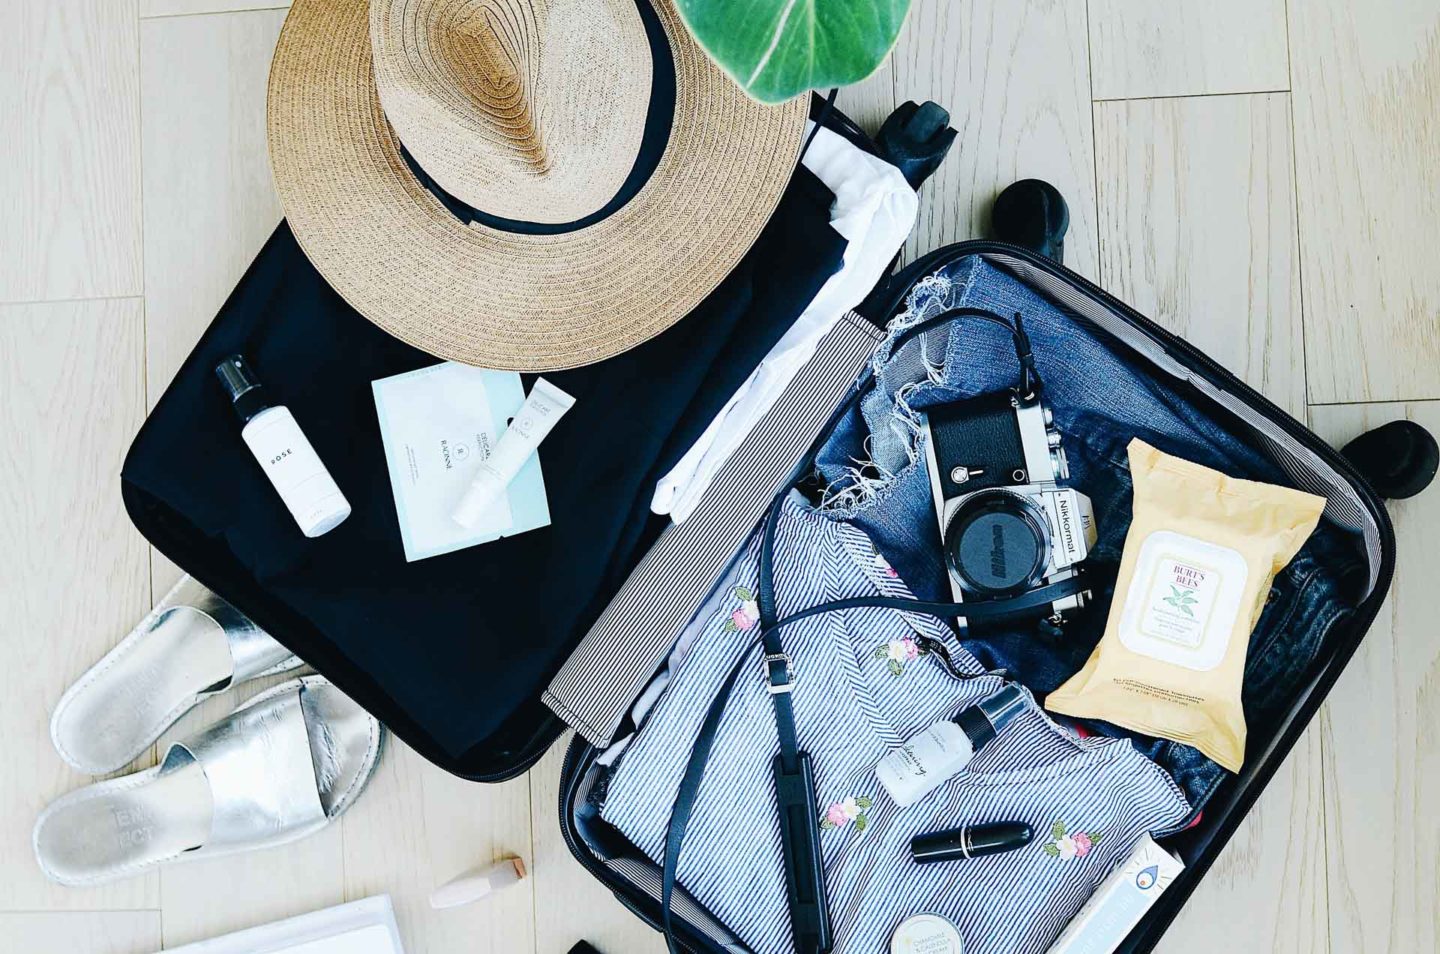 10 Top-Rated Travel Accessories That You Need Before Your Next